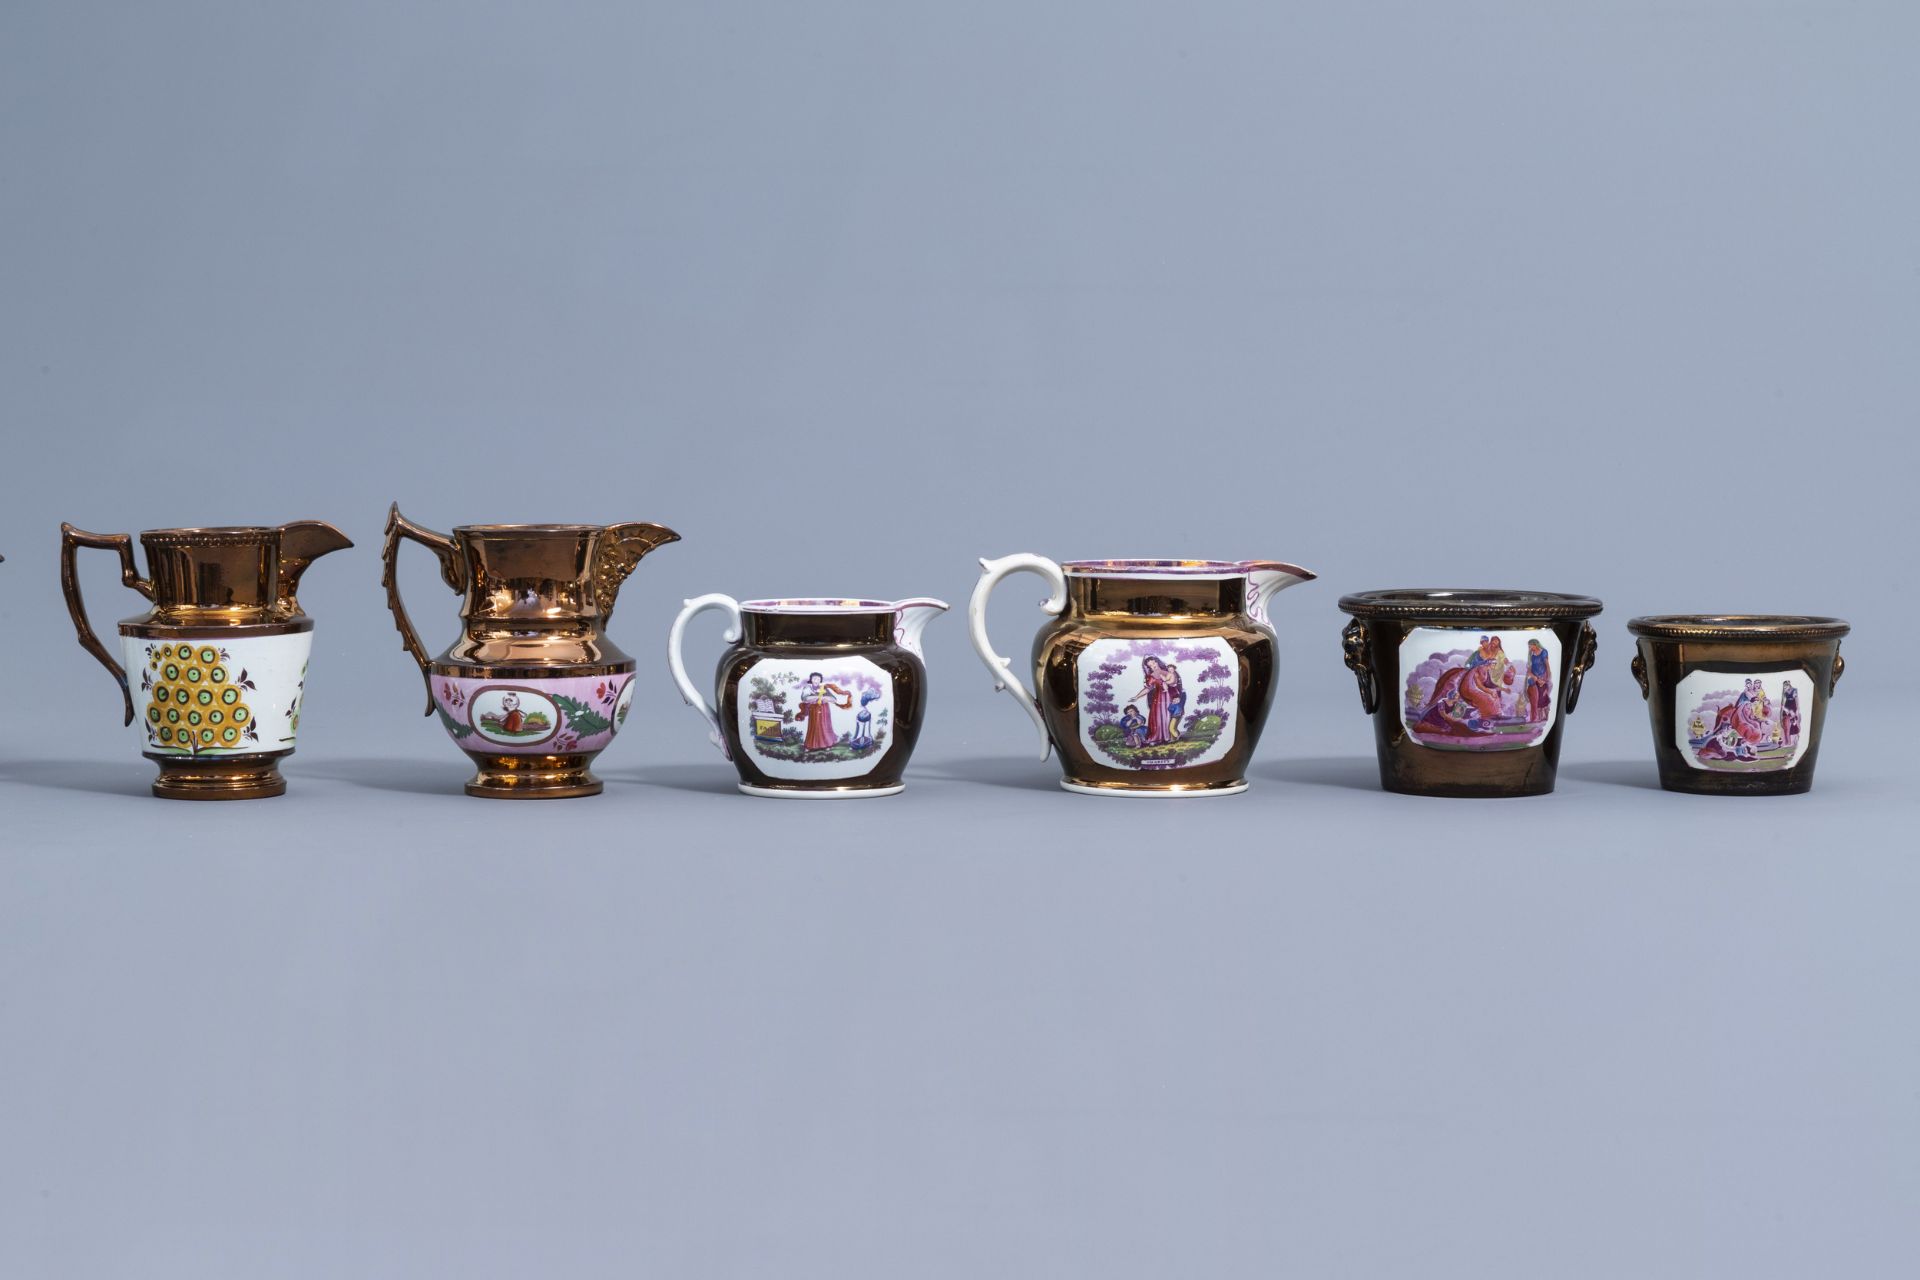 A varied collection of English lustreware items, 19th C. - Image 35 of 44